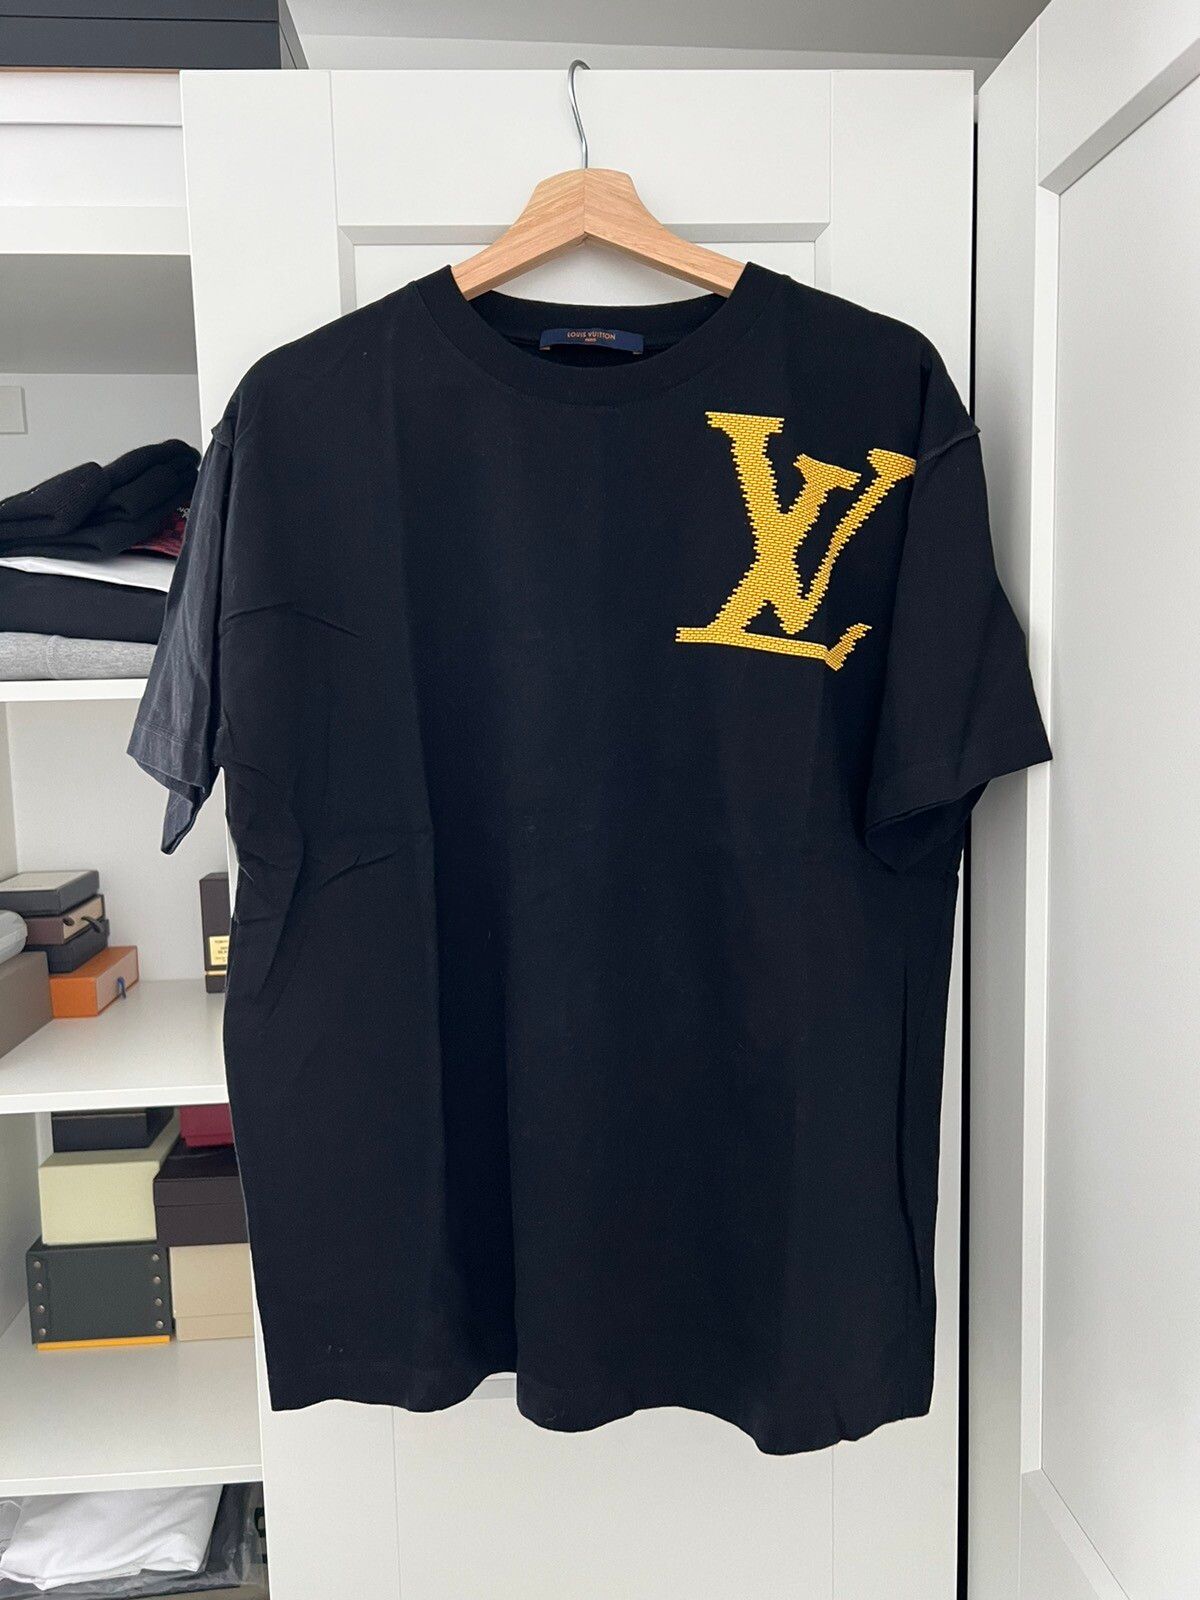 Louis Vuitton LV Fade Printed Long-sleeved T-Shirt BLACK. Size S0